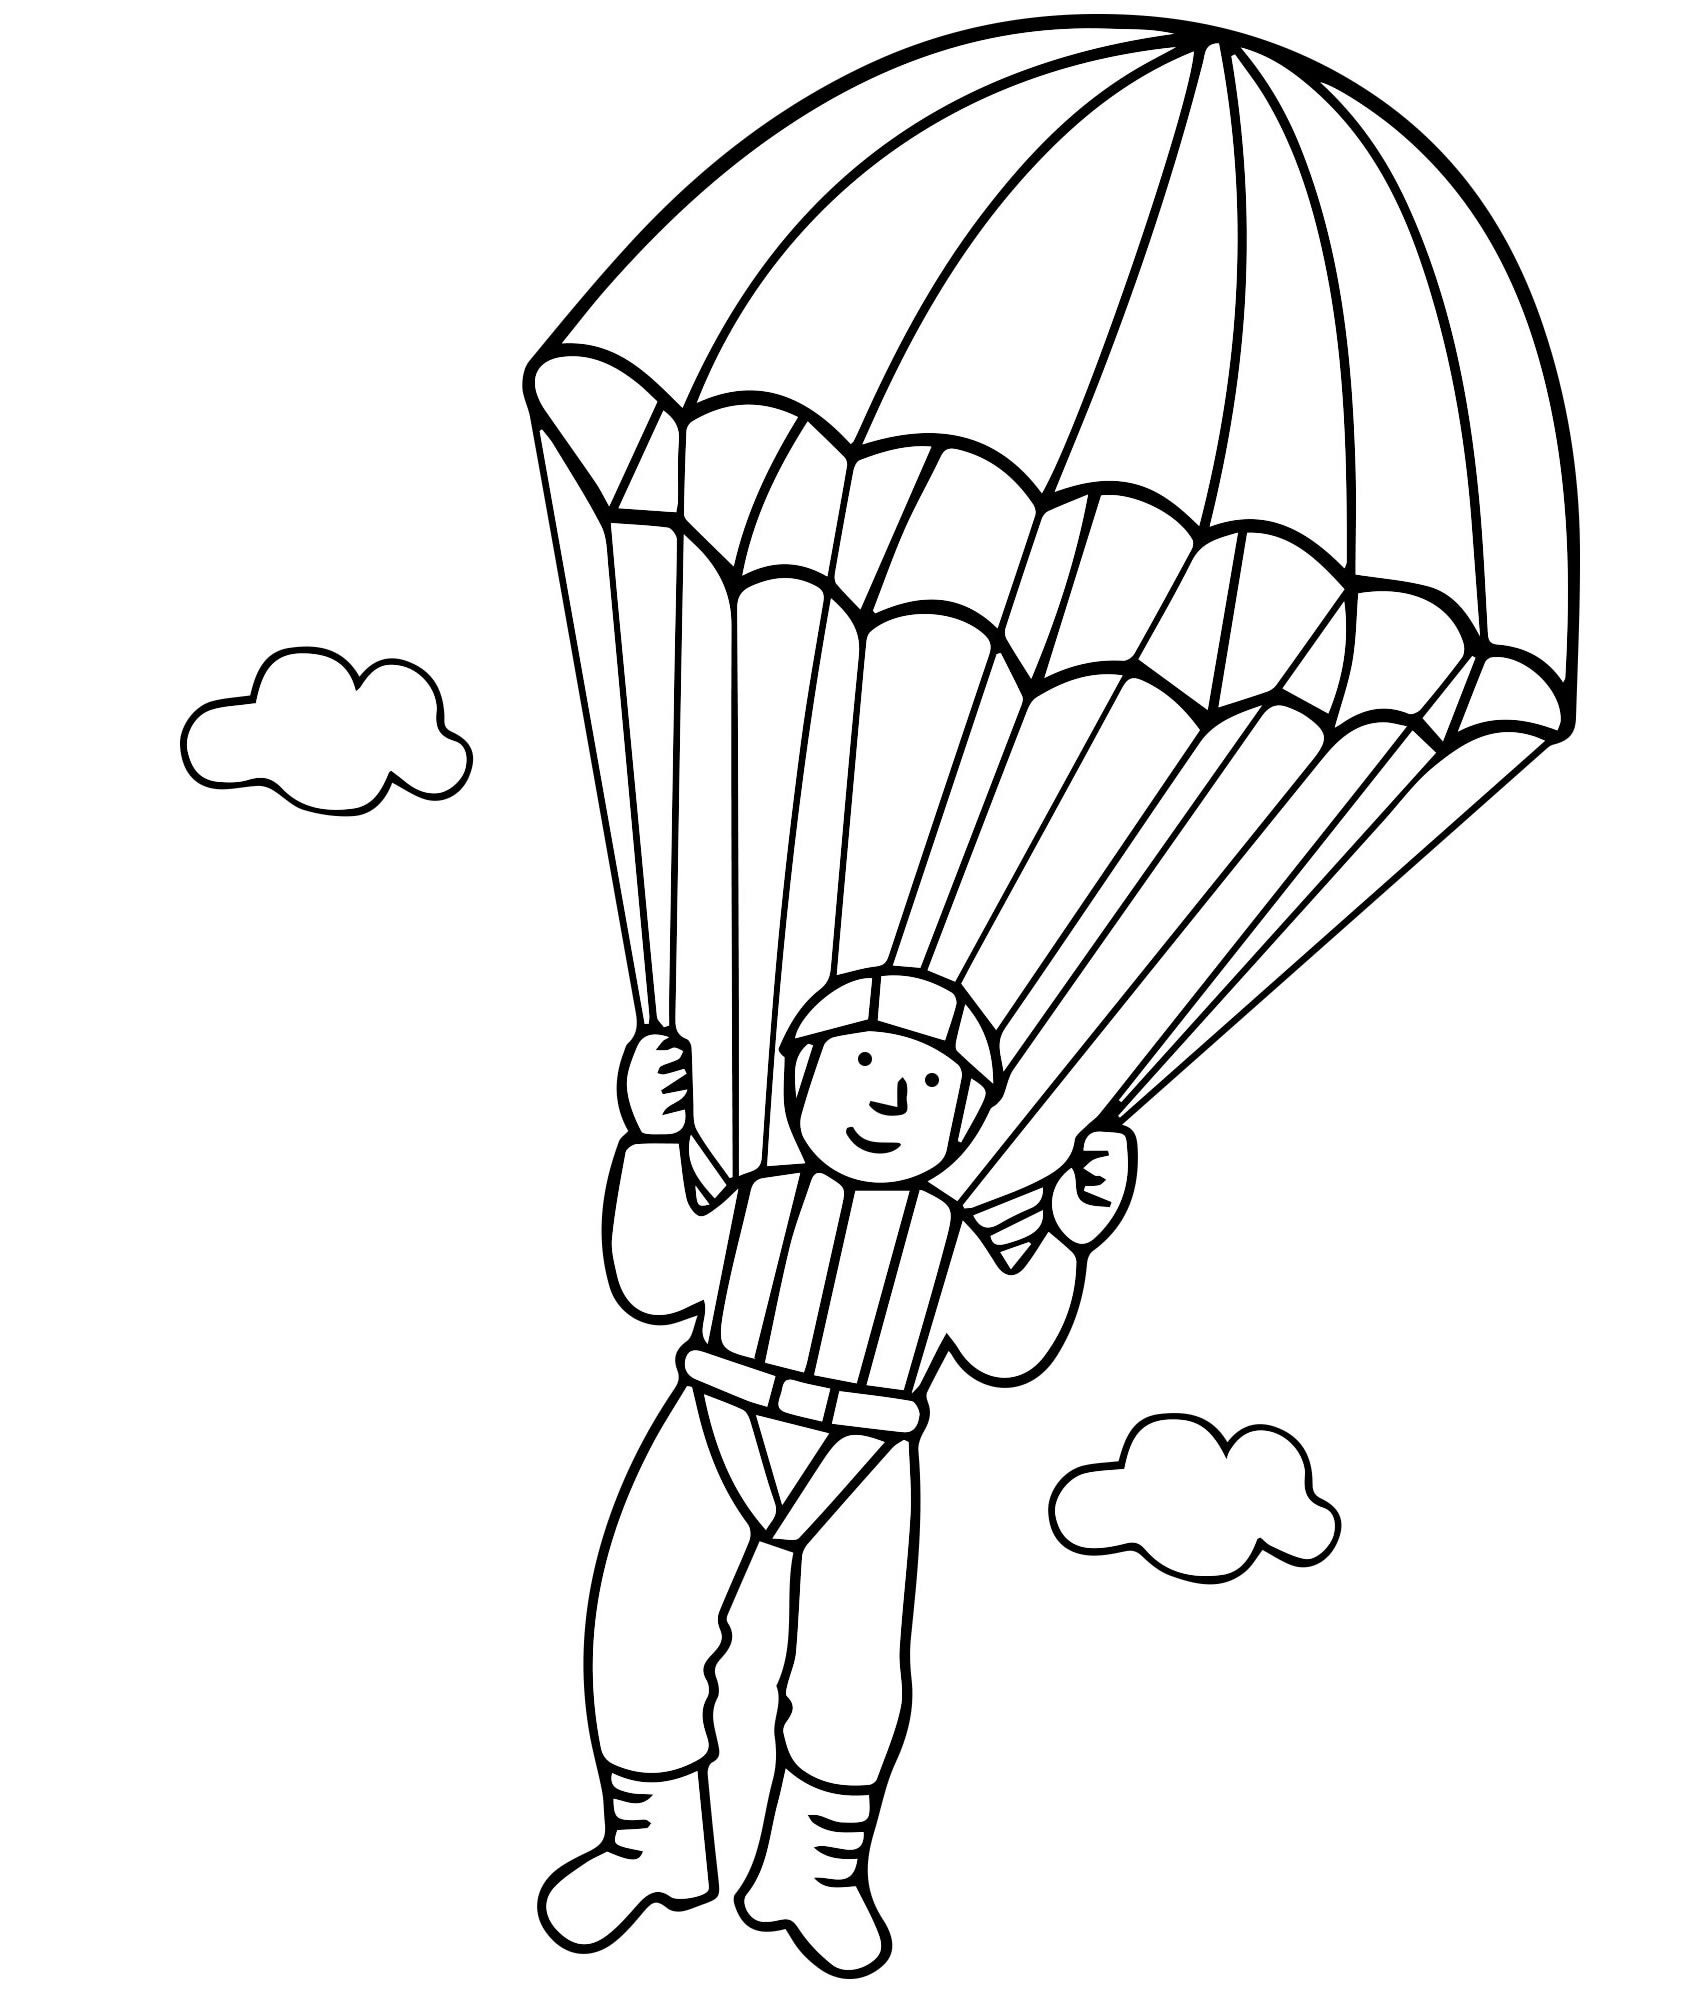 Coloring book shining skydiver